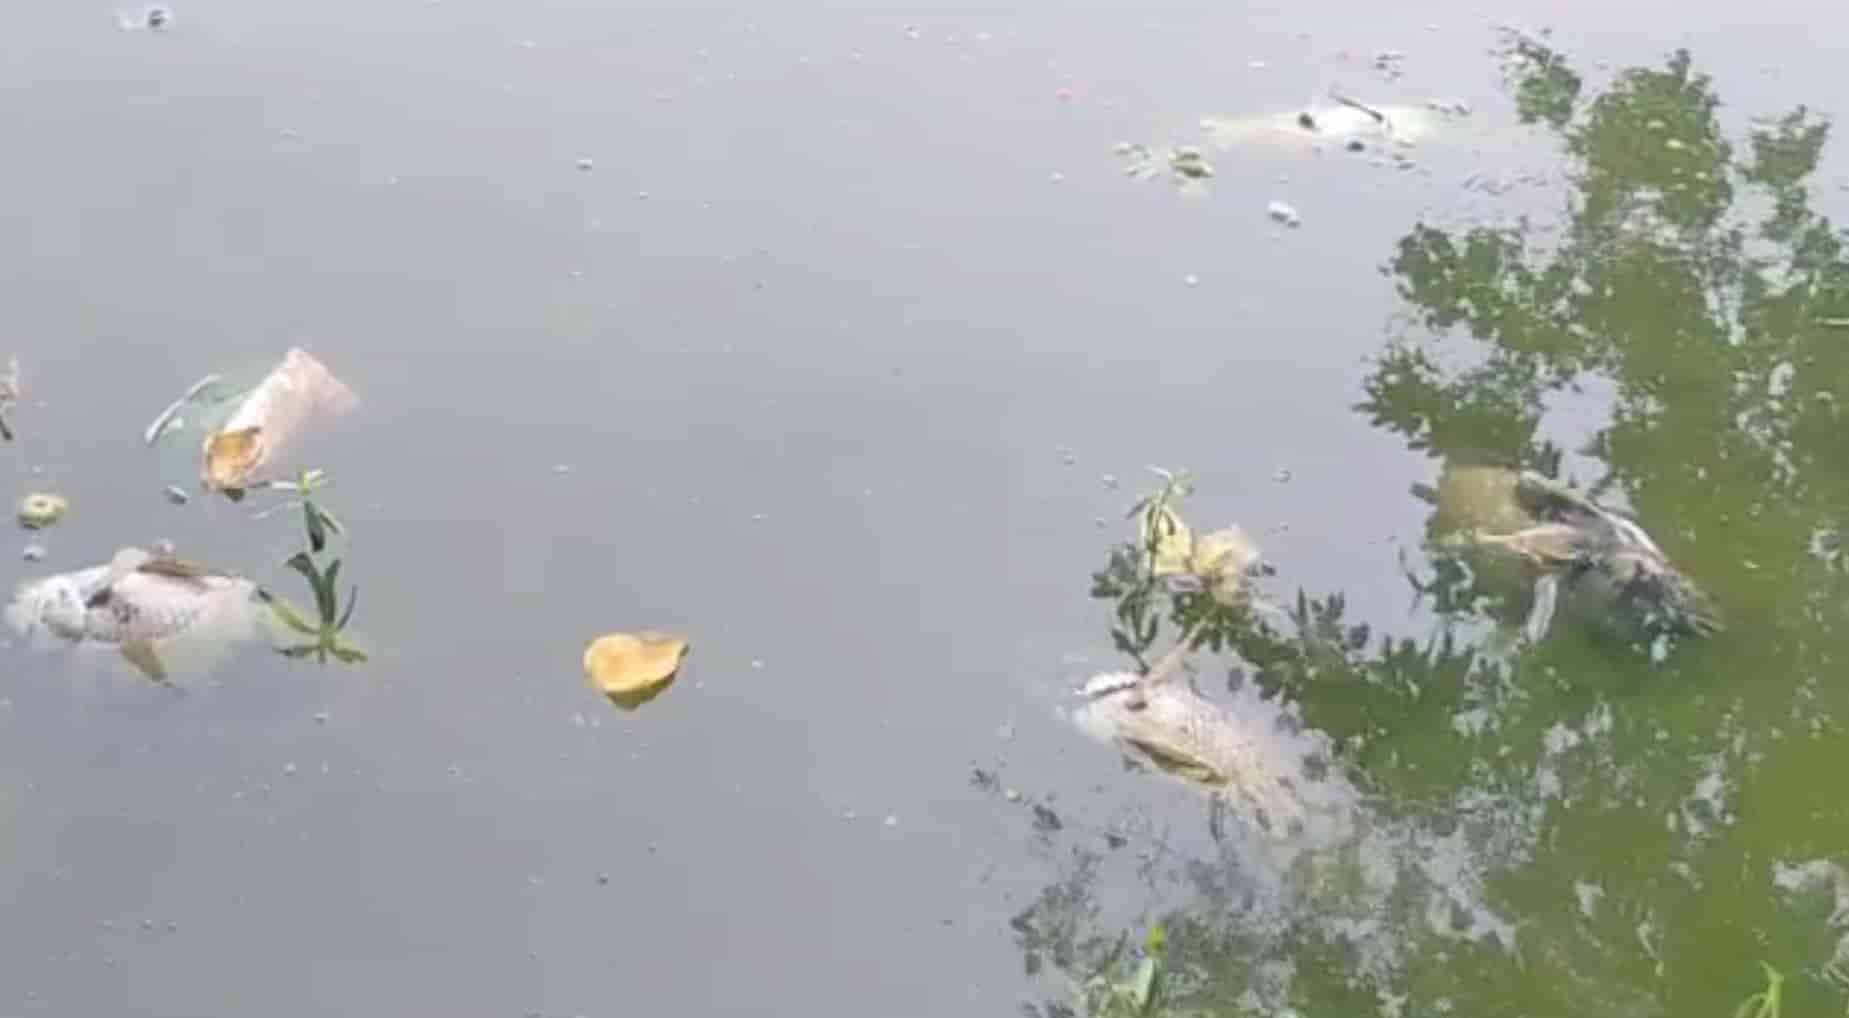 Mass death of fish in Jayanti Sarovar, Jubilee Park, Jamshedpur raises questions about water quality and maintenance.